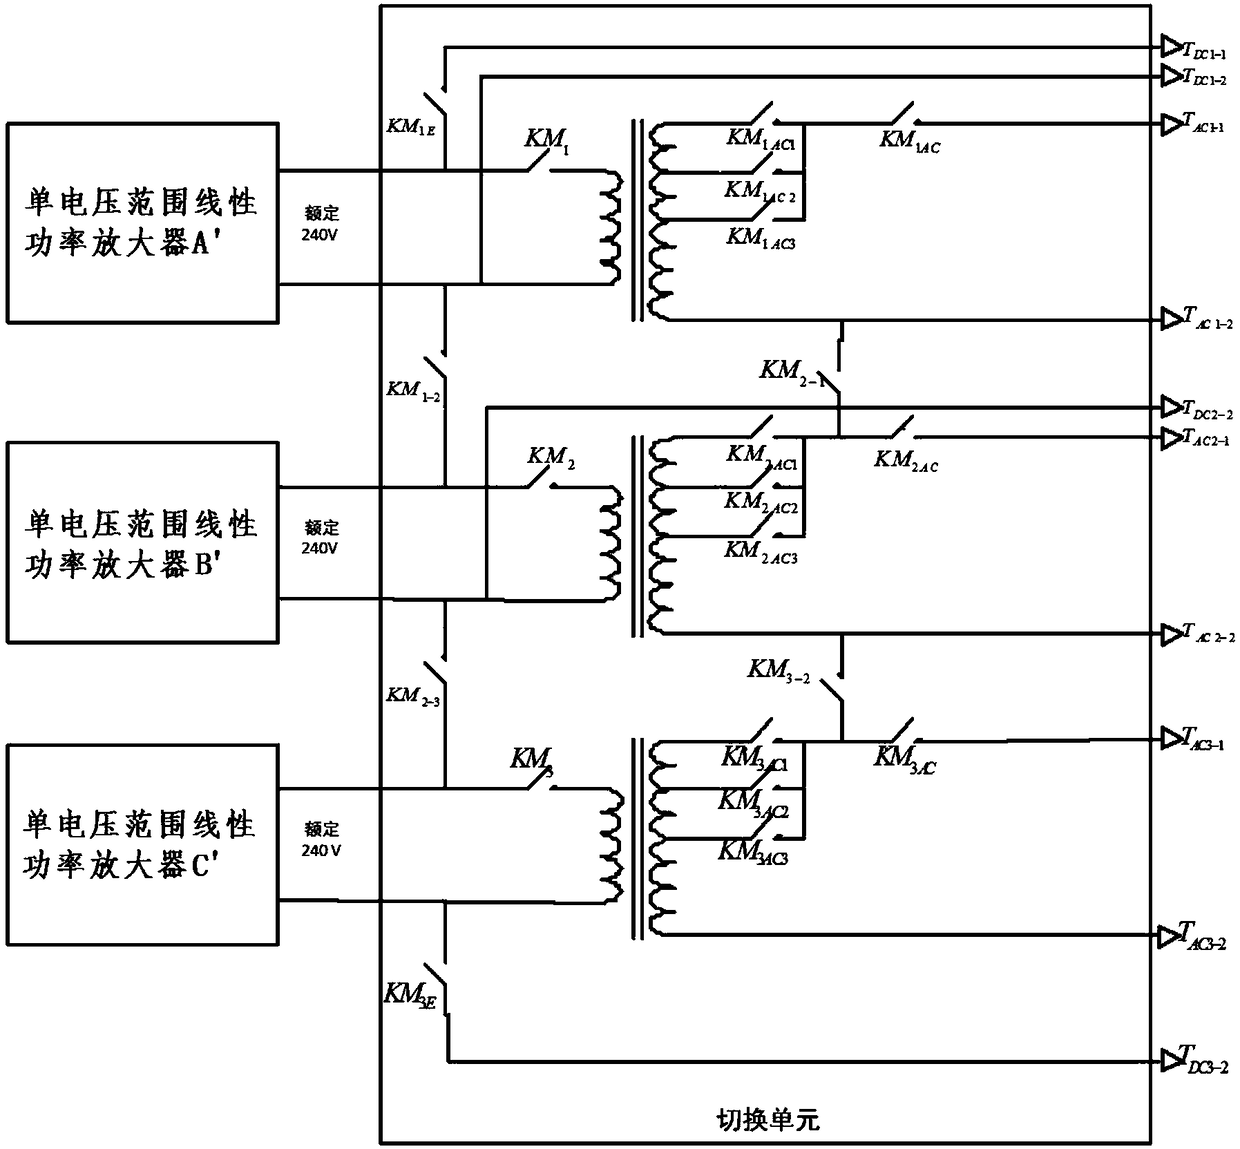 A linear power amplifier with multiple voltage outputs